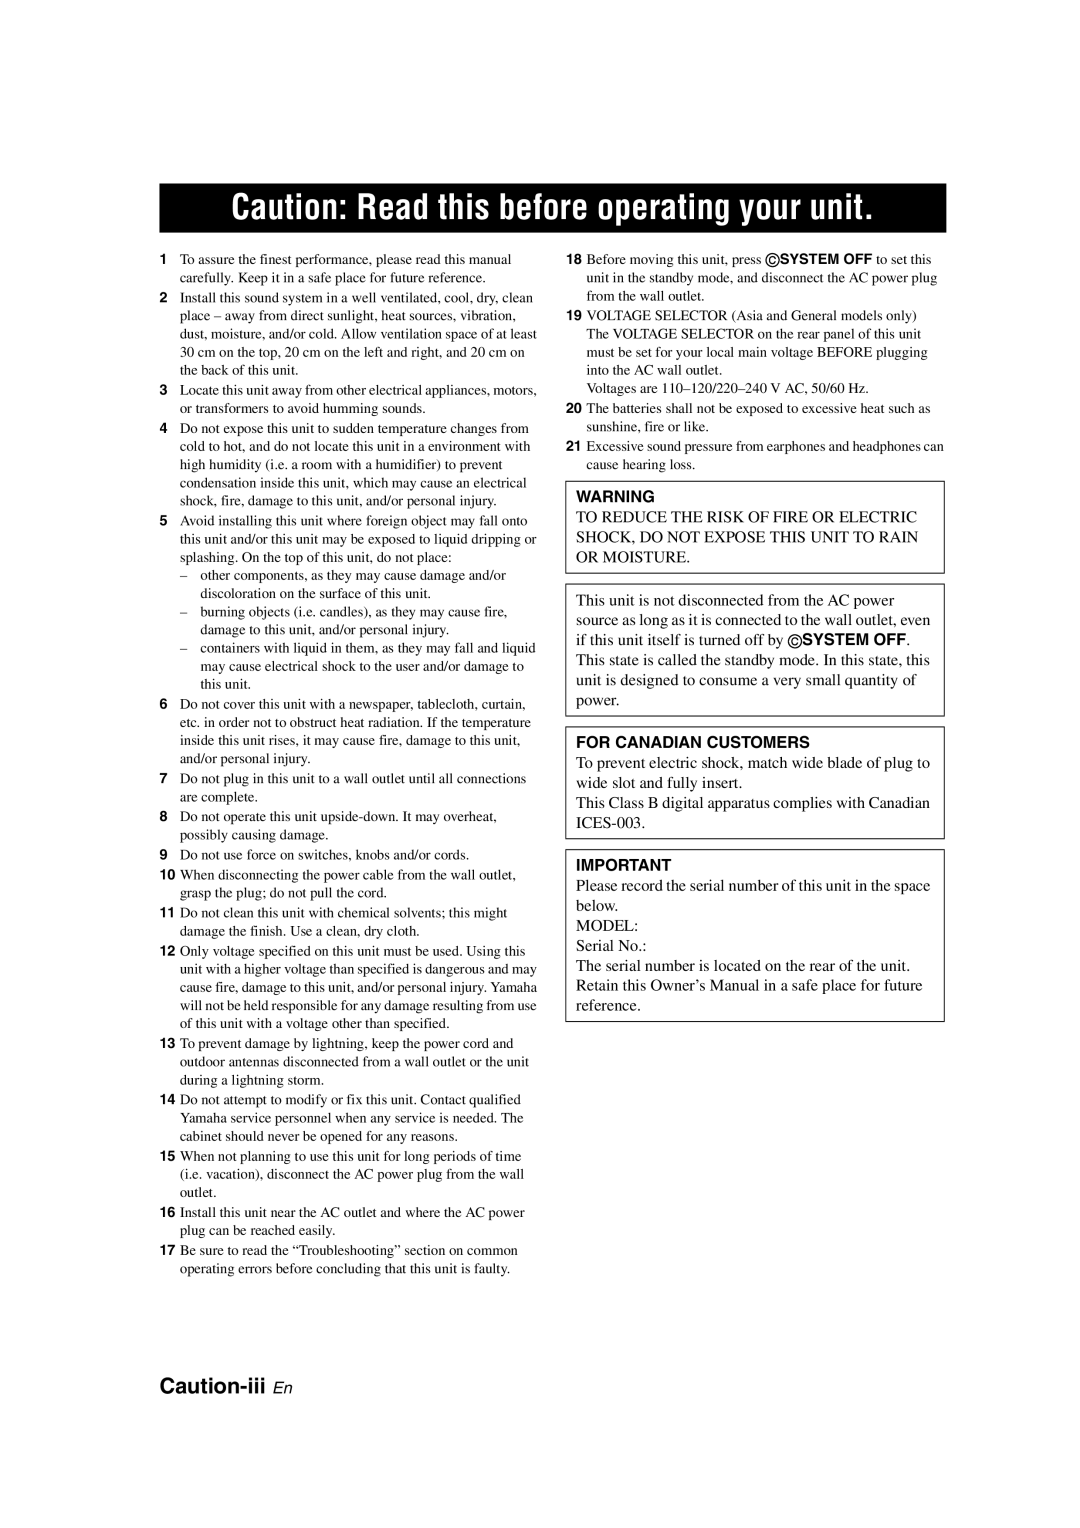 Yamaha HTR-6150 owner manual Caution: Read this before operating your unit, Caution-iii En 